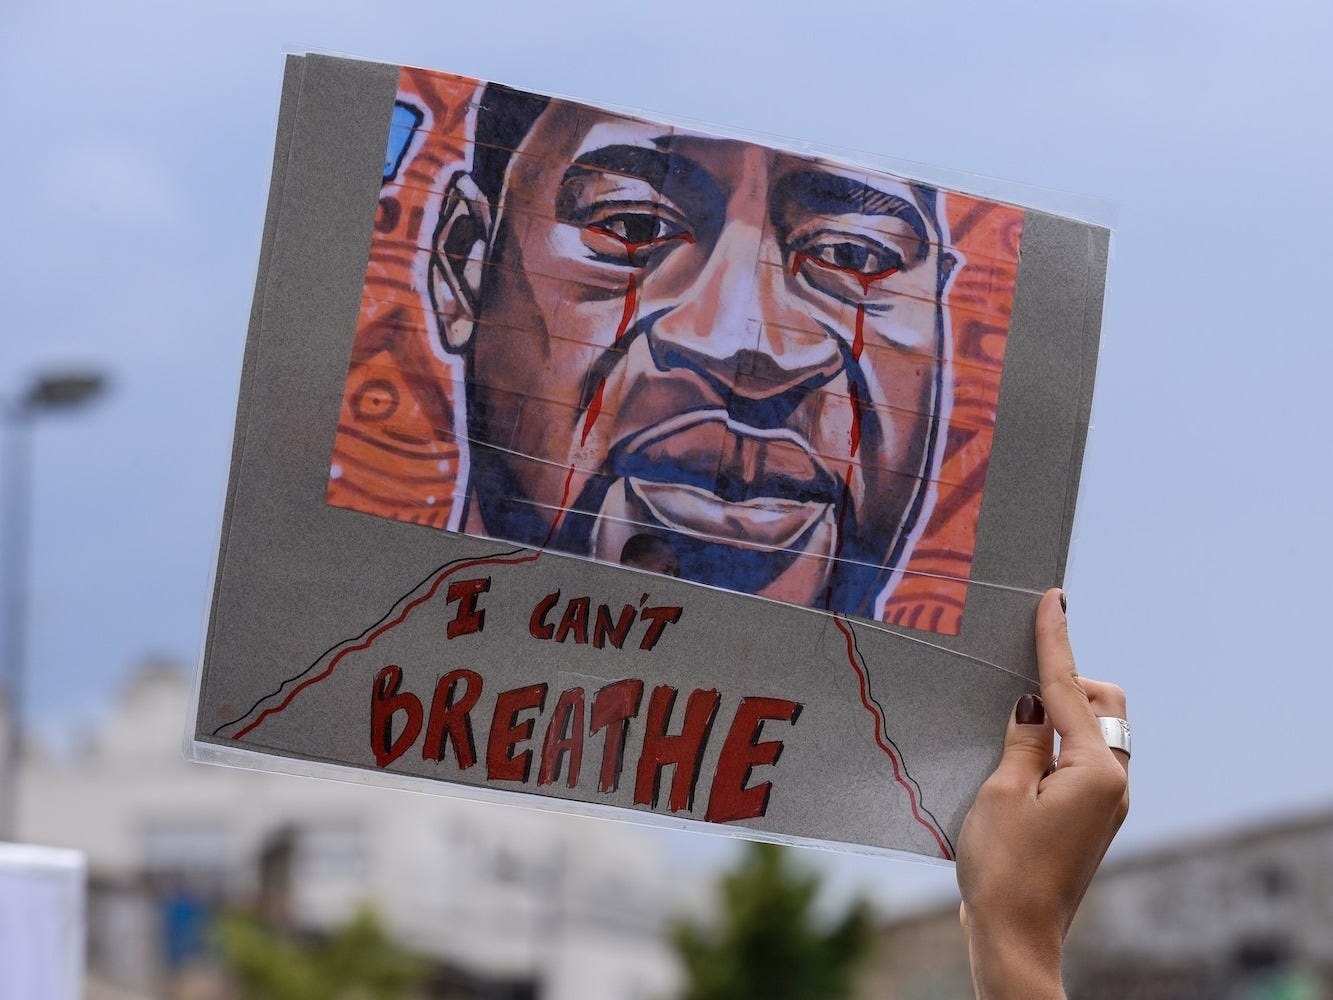 A woman holds a placard depicting George Floyd's face and reading "I can't breathe" in Bordeaux, France, on June 9, 2020 Nicolas Tucat/AFP via Getty Images